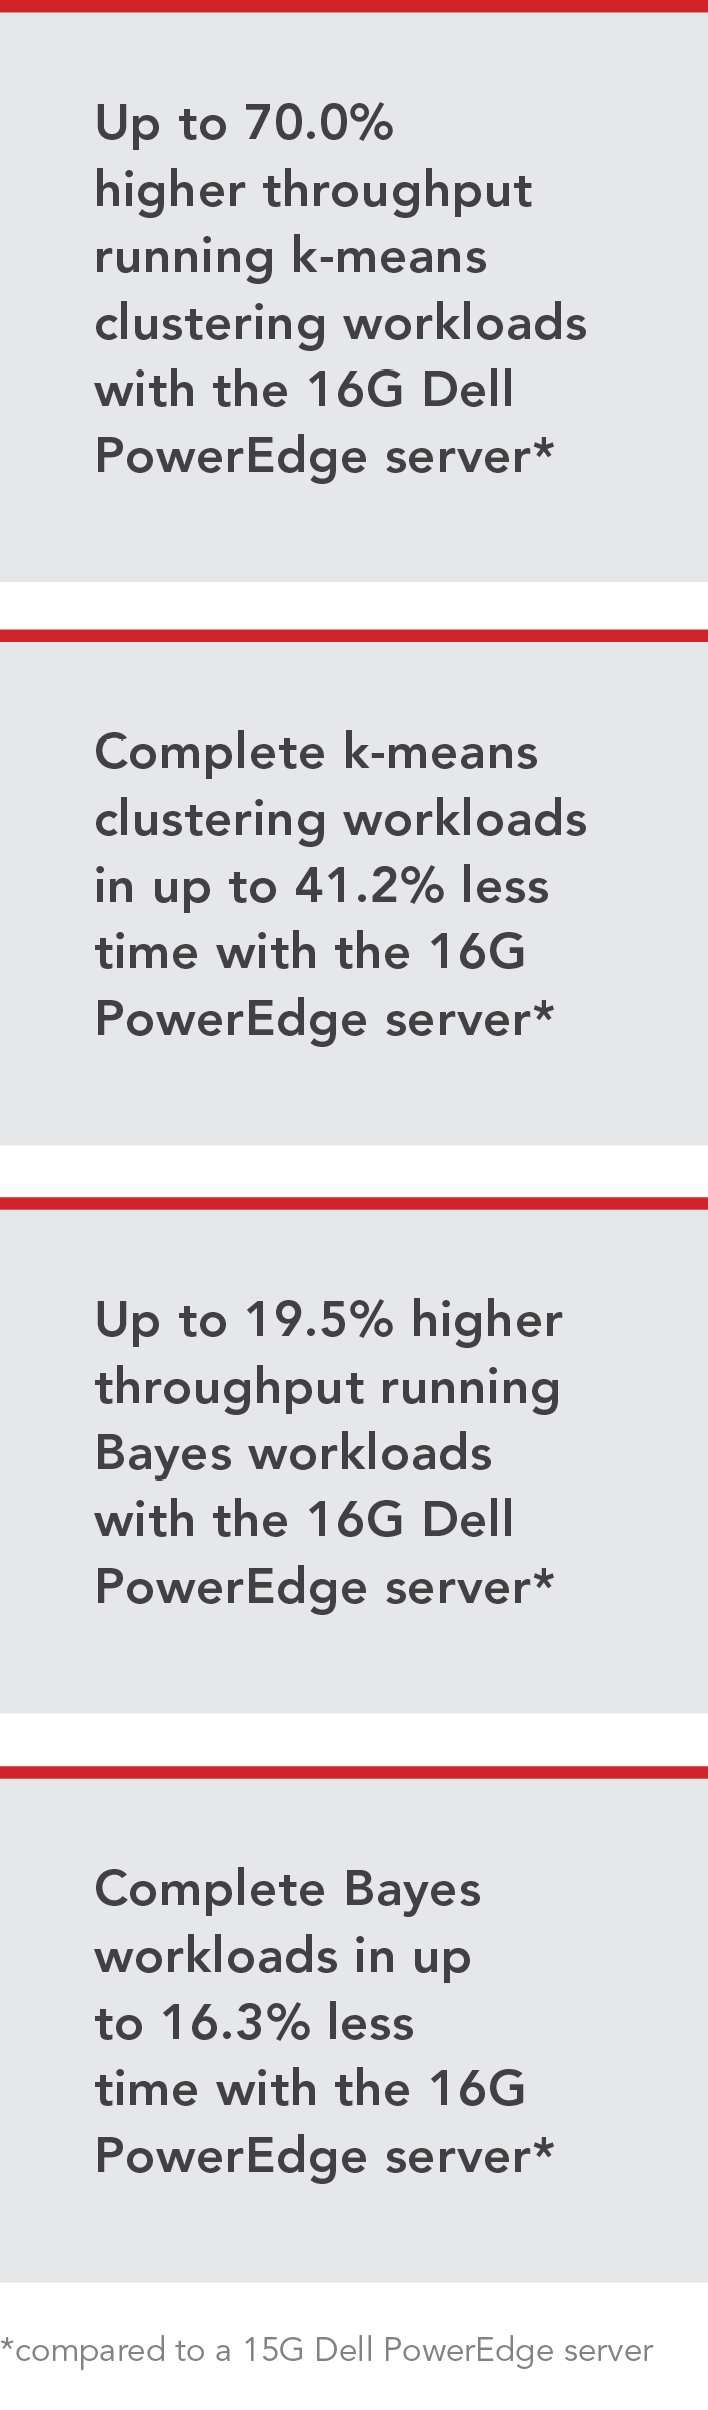 Up to 70.0% higher throughput running k-means clustering workloads with the 16G Dell PowerEdge server compared to a 15G Dell PowerEdge server, Complete k-means clustering workloads in up to 41.2% less time with the 16G PowerEdge Server compared to a 15G Dell PowerEdge server, Up to 19.5% higher throughput running Bayes workloads with the 16G Dell PowerEdge server compared to a 15G Dell PowerEdge server, and Complete Bayes workloads in up to 16.3% less time with the 16G PowerEdge server compared to a 15G Dell PowerEdge server.